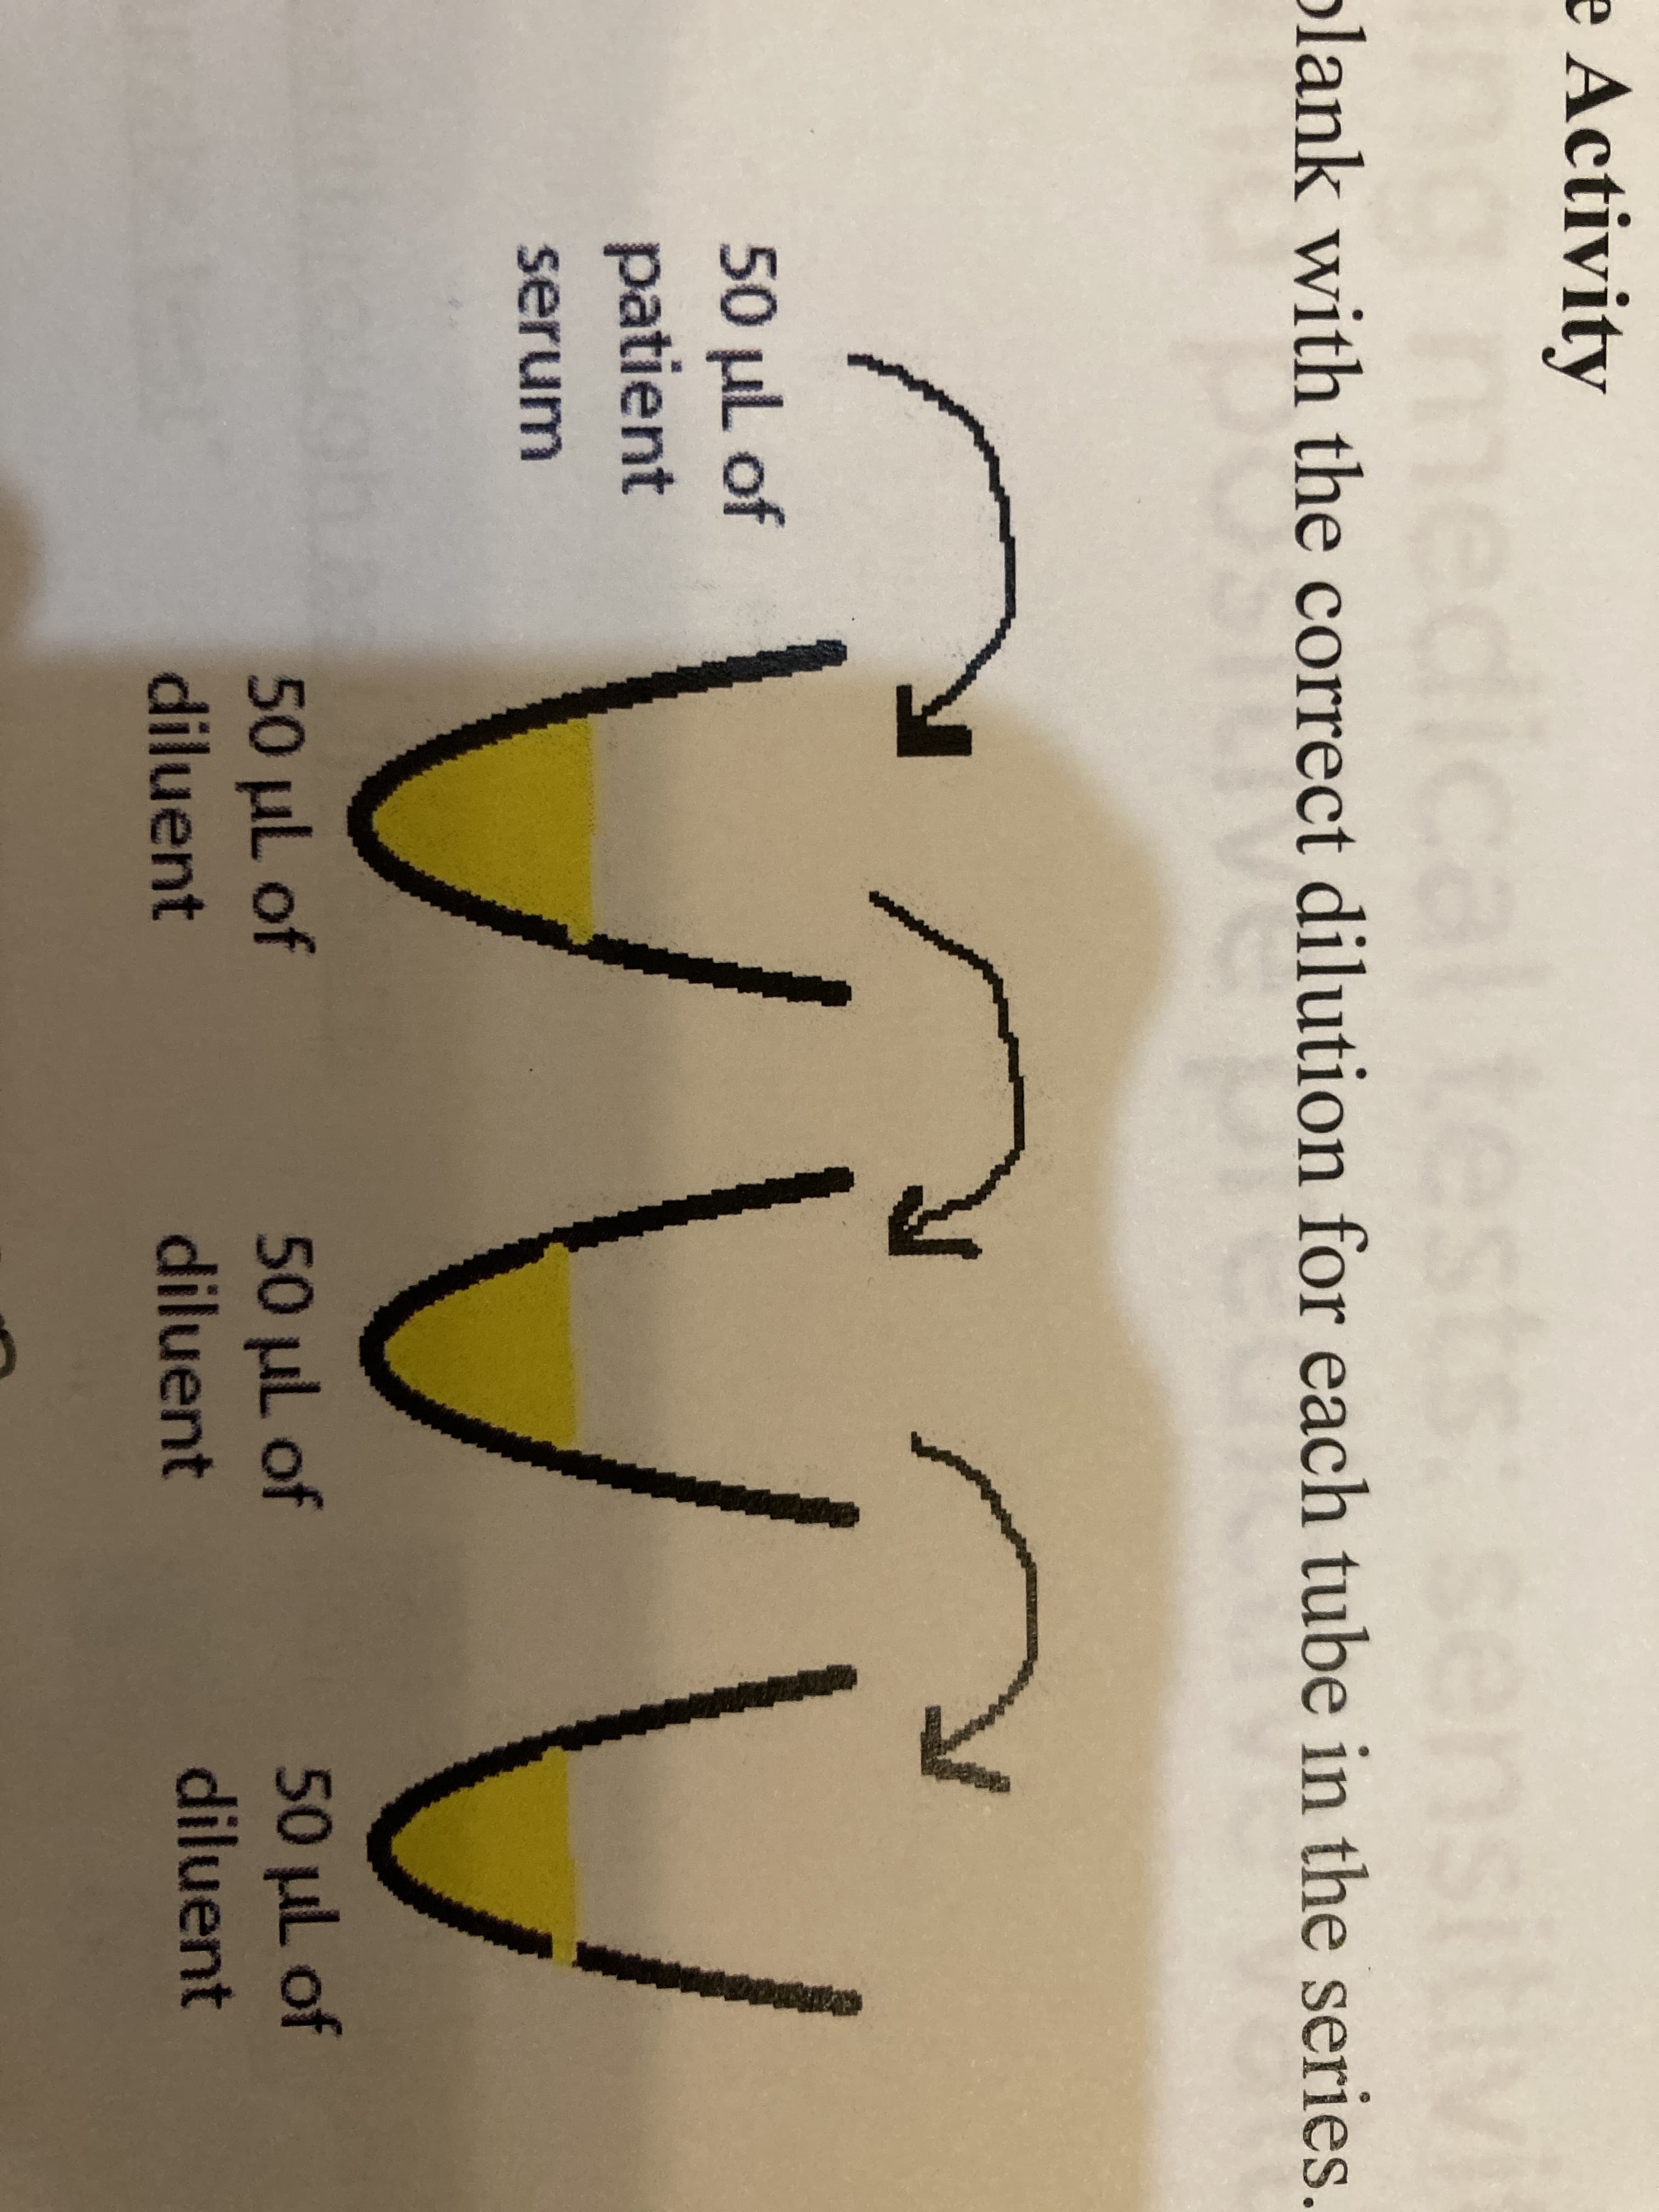 nsitlv
plank with the correct dilution for each tube in the series.
e Activity
amedical tests: se
e correcet
50 ul of
patient
serum
50 µl of
diluent
50 uL of
diluent
50 µL of
diluent
